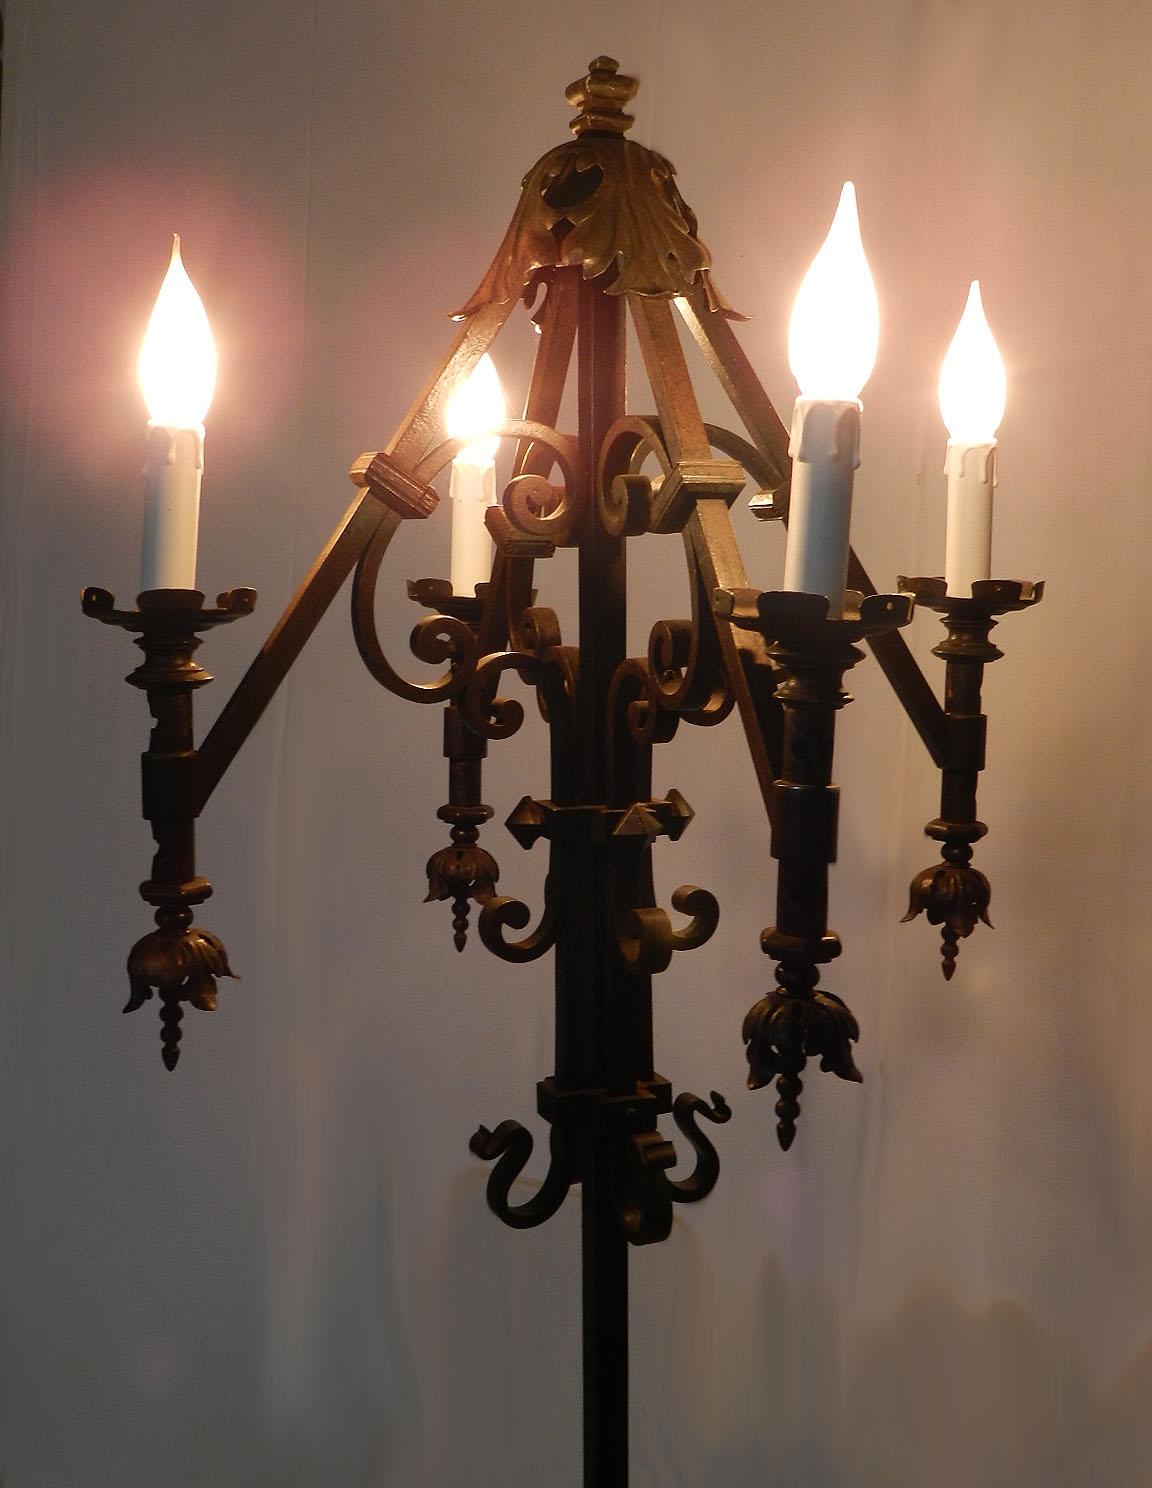 Arts and Crafts Floor Lamp Gothic Revival, circa 1920 wrought iron 
stunning and original
Four candle sleeve lights 
This can easily be re-wired and tested to USA or European standards.